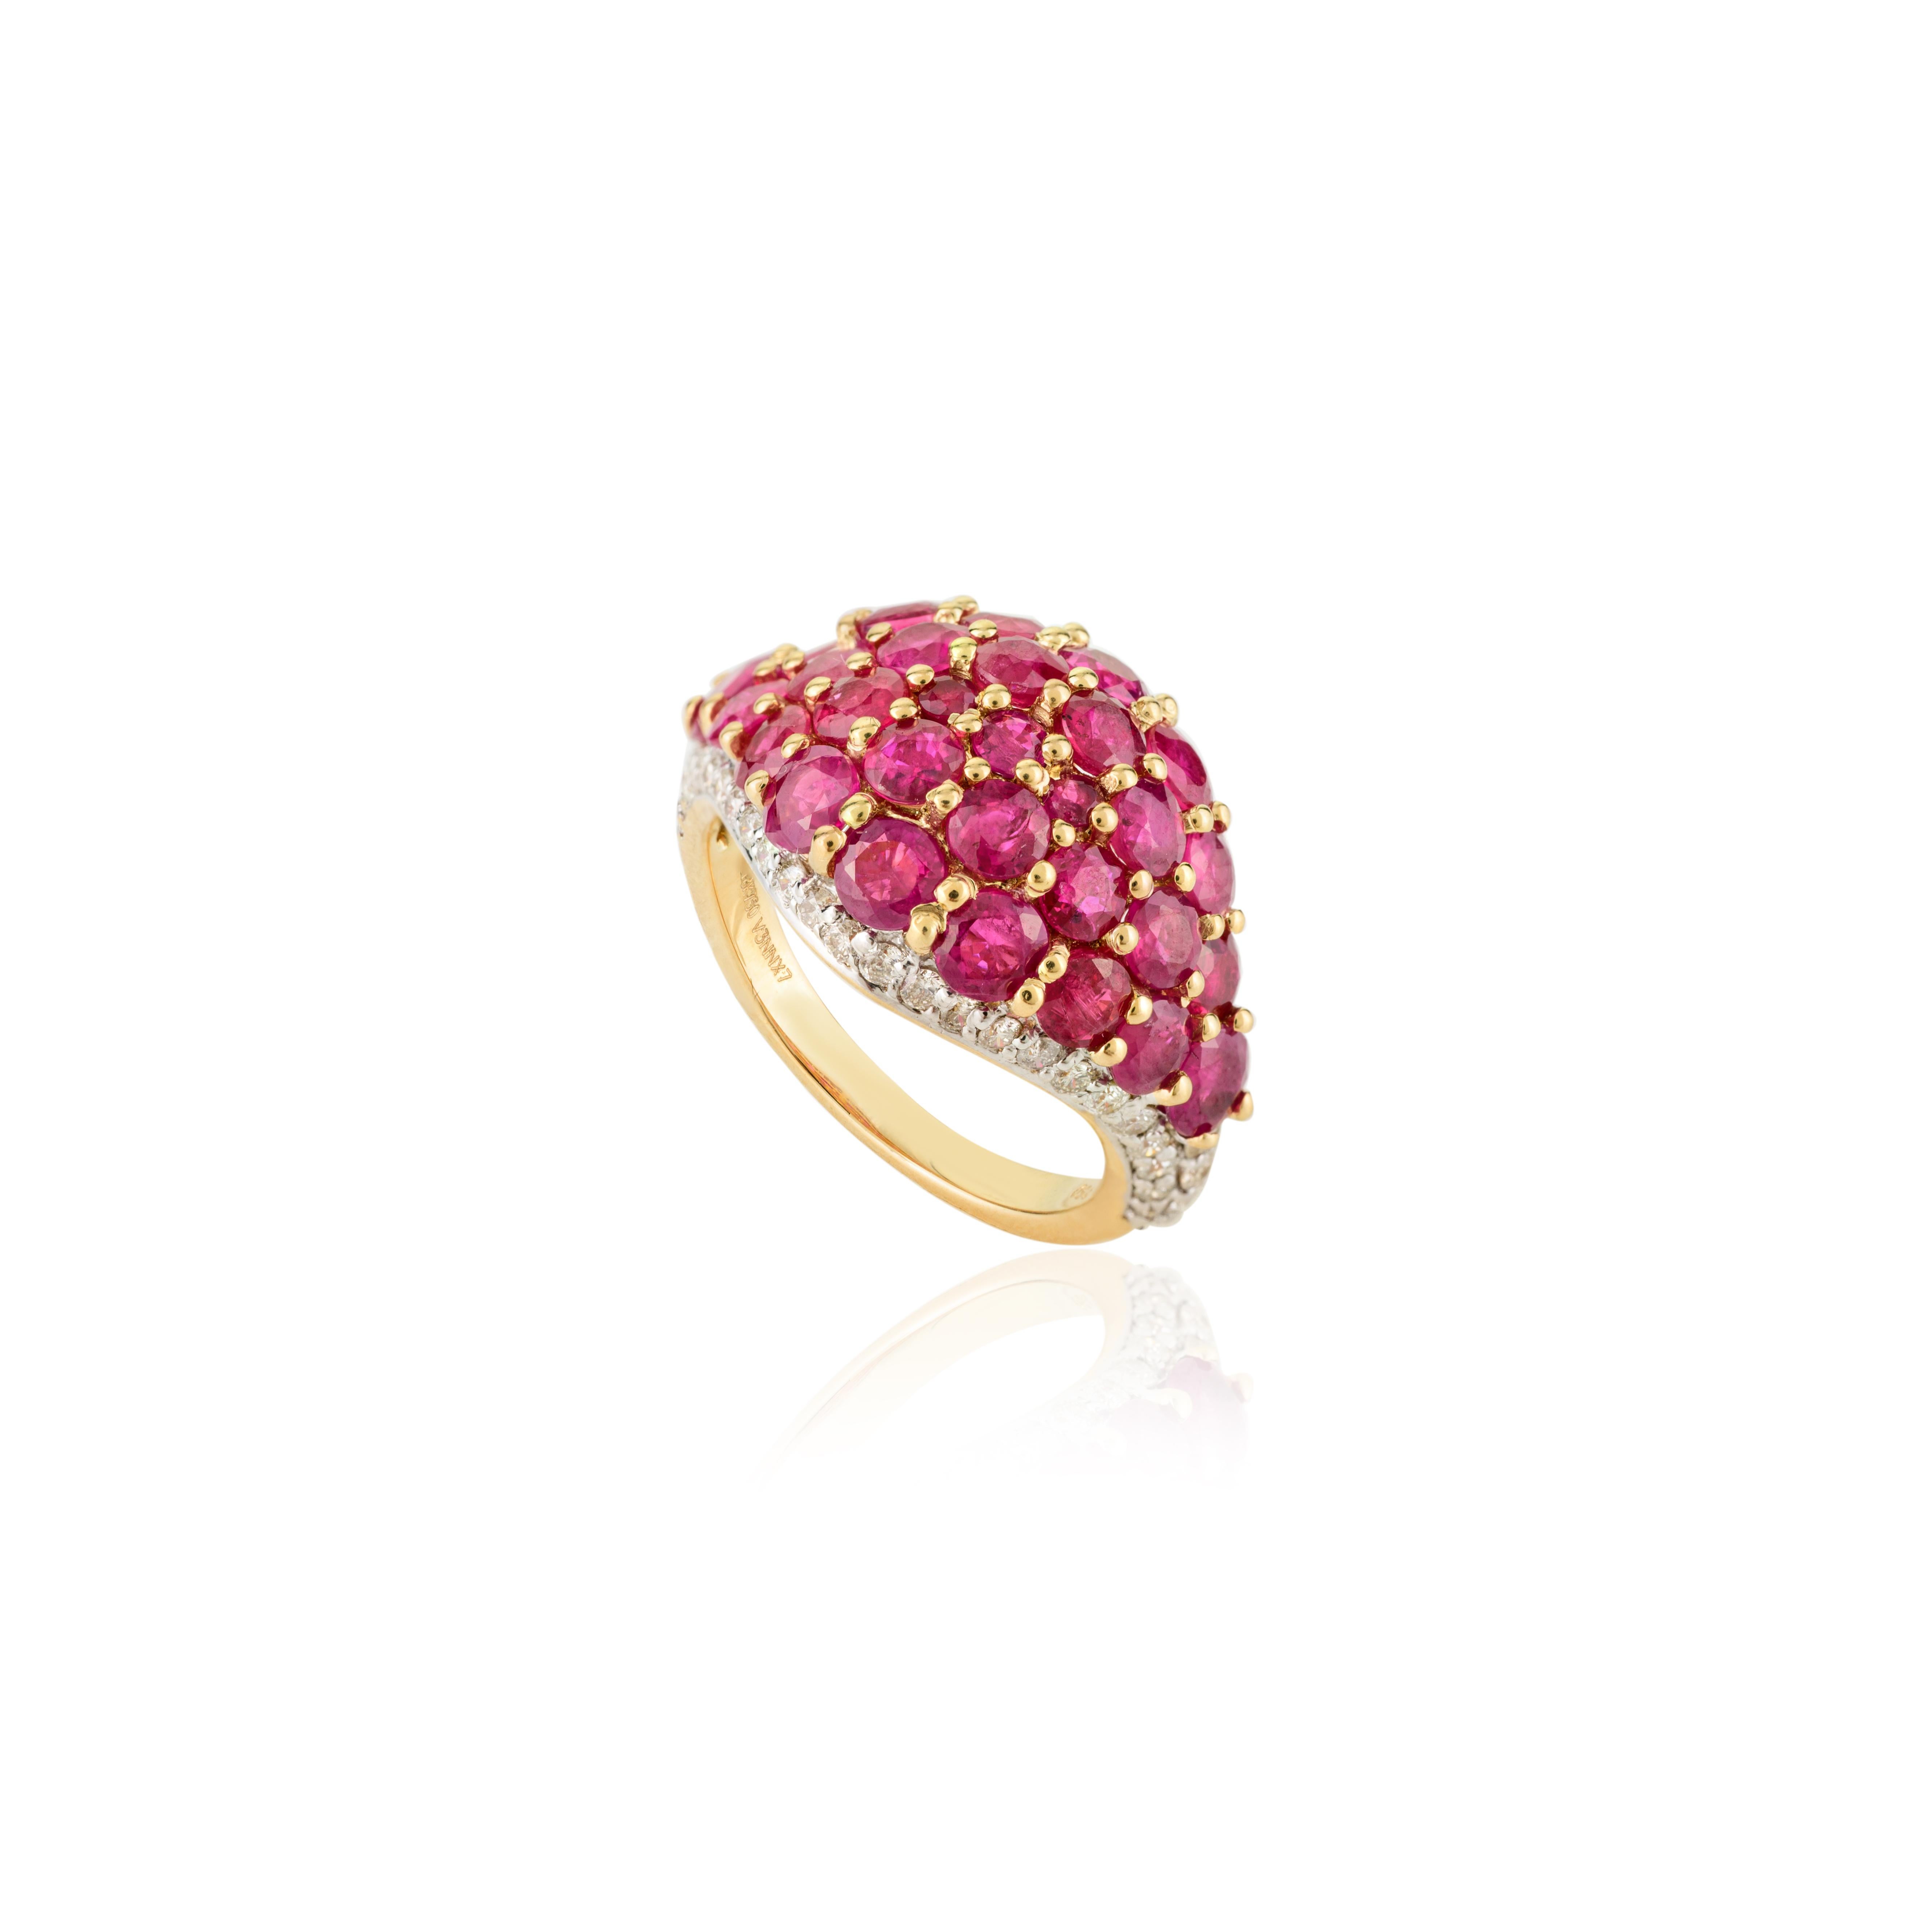 For Sale:  Natural Cluster Ruby and Diamond Wedding Ring in 18k Yellow Gold 9